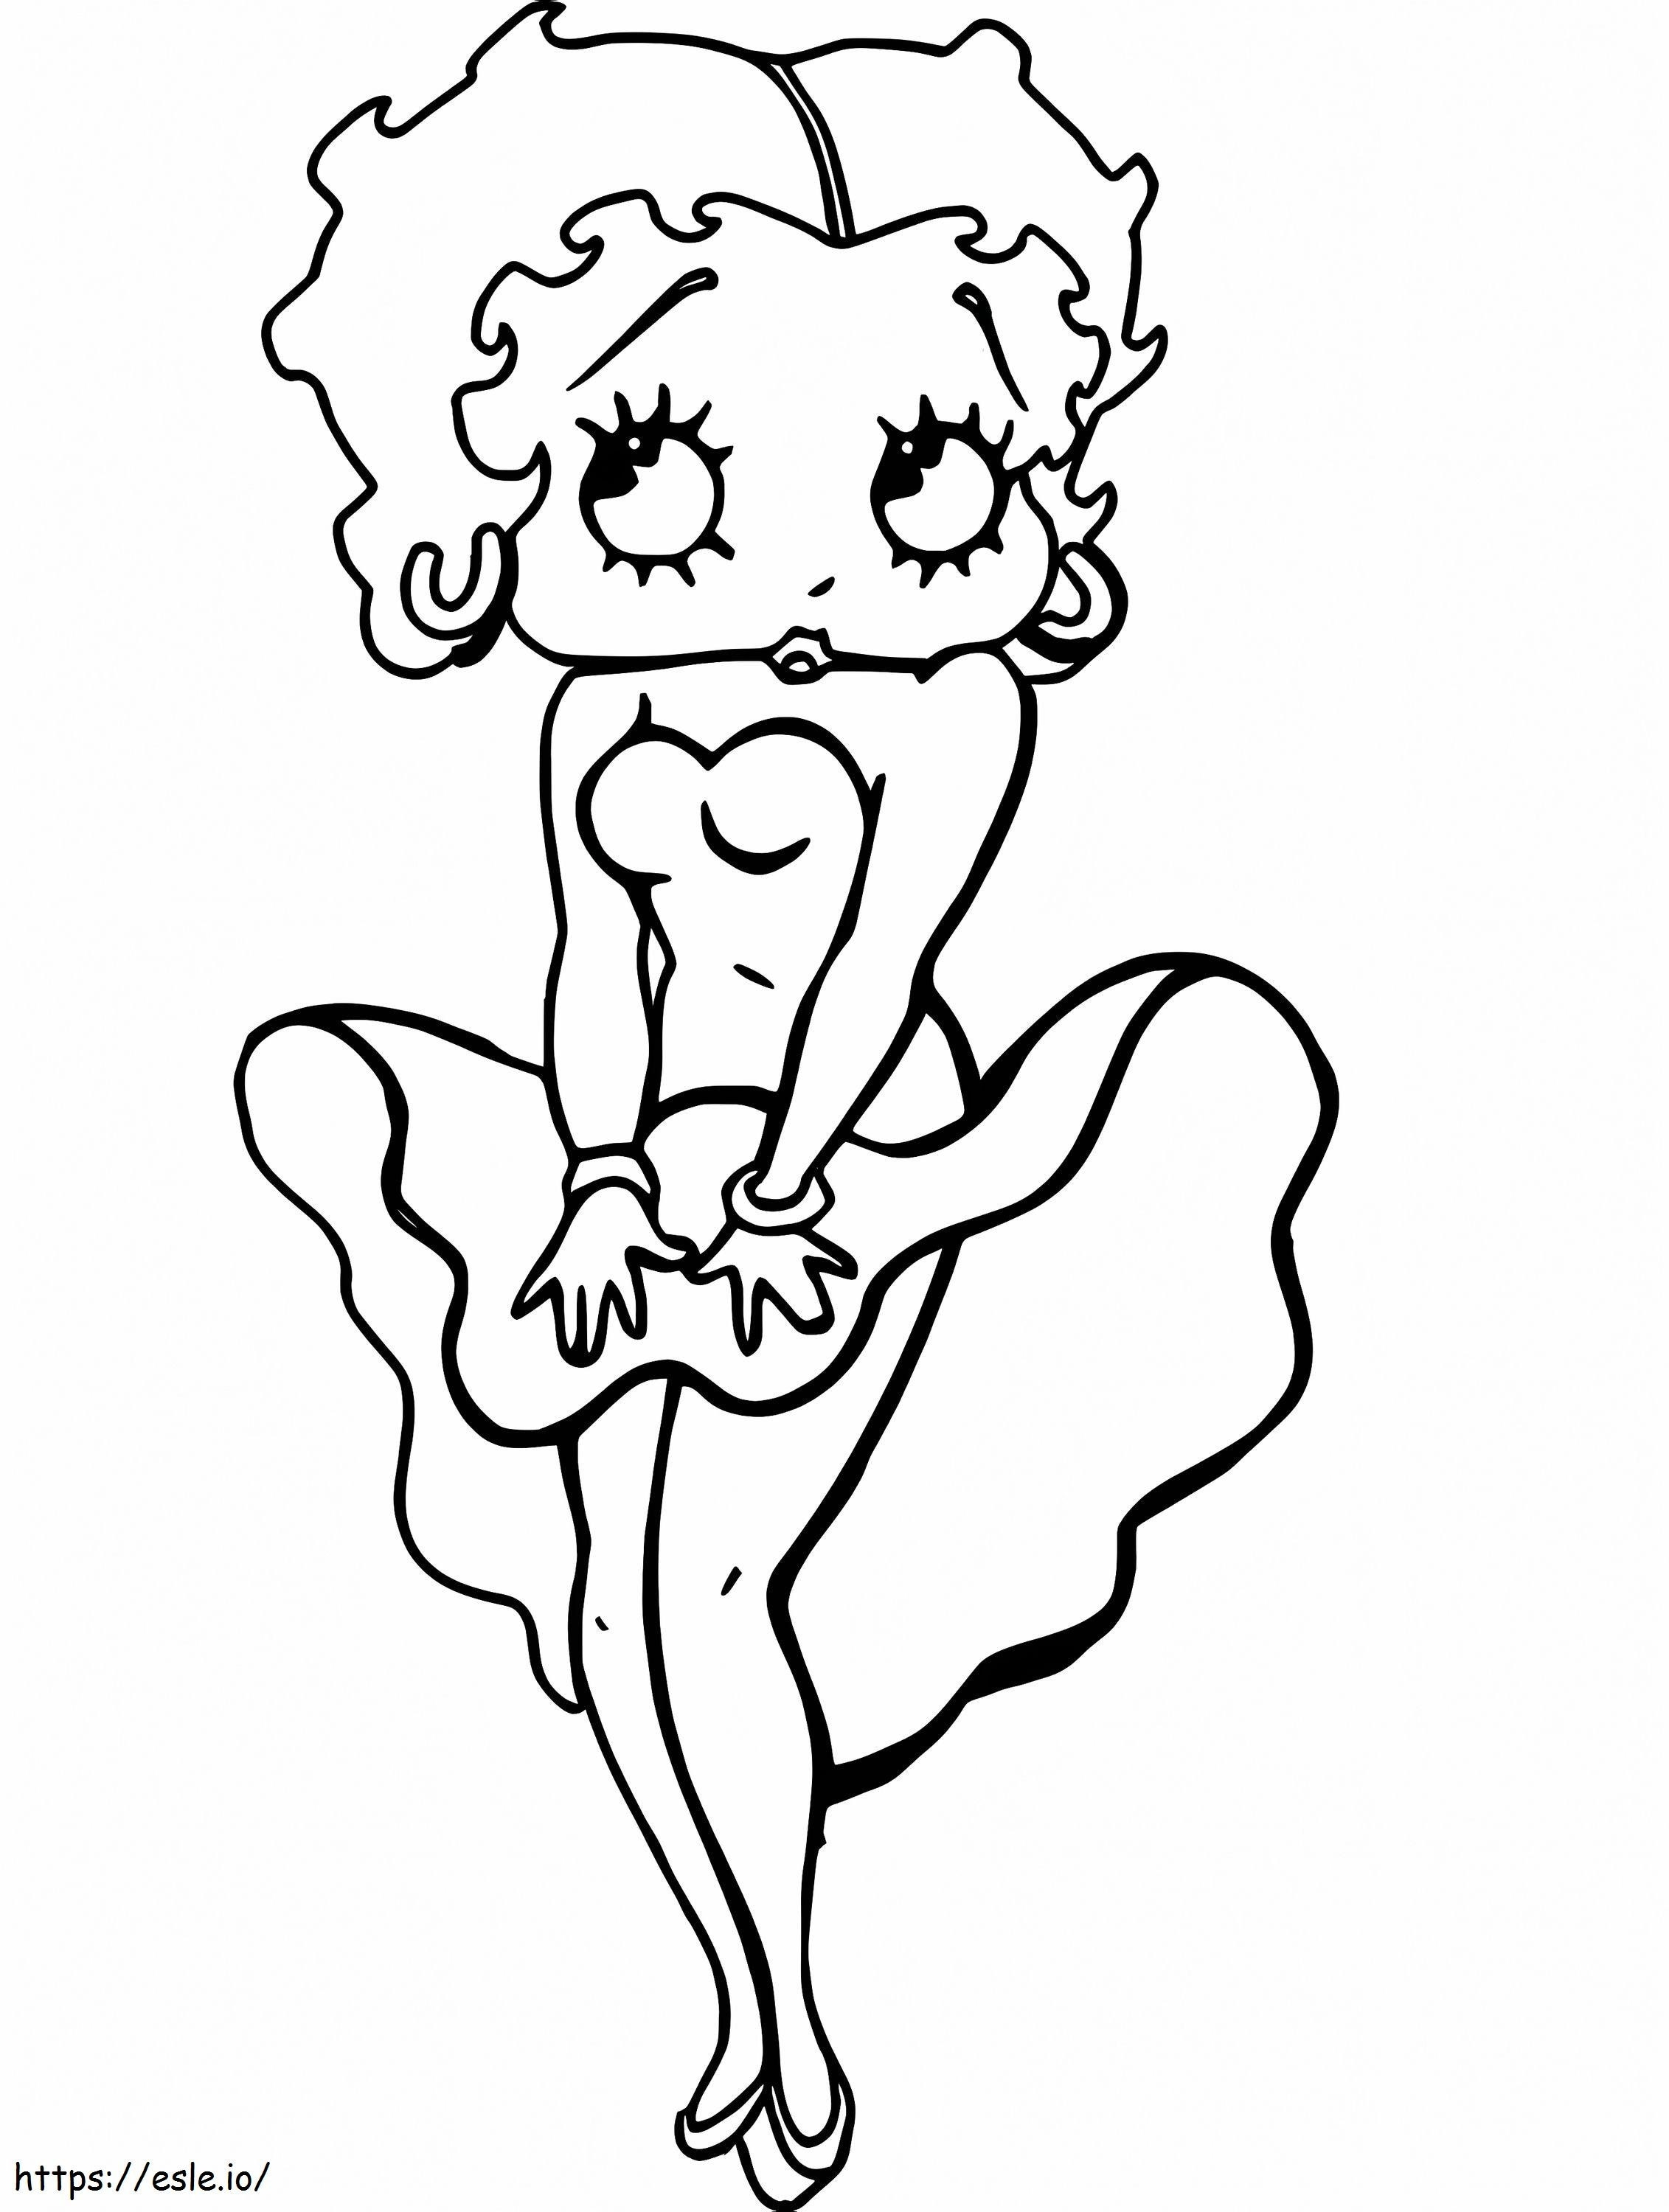 Shy Betty Boop coloring page